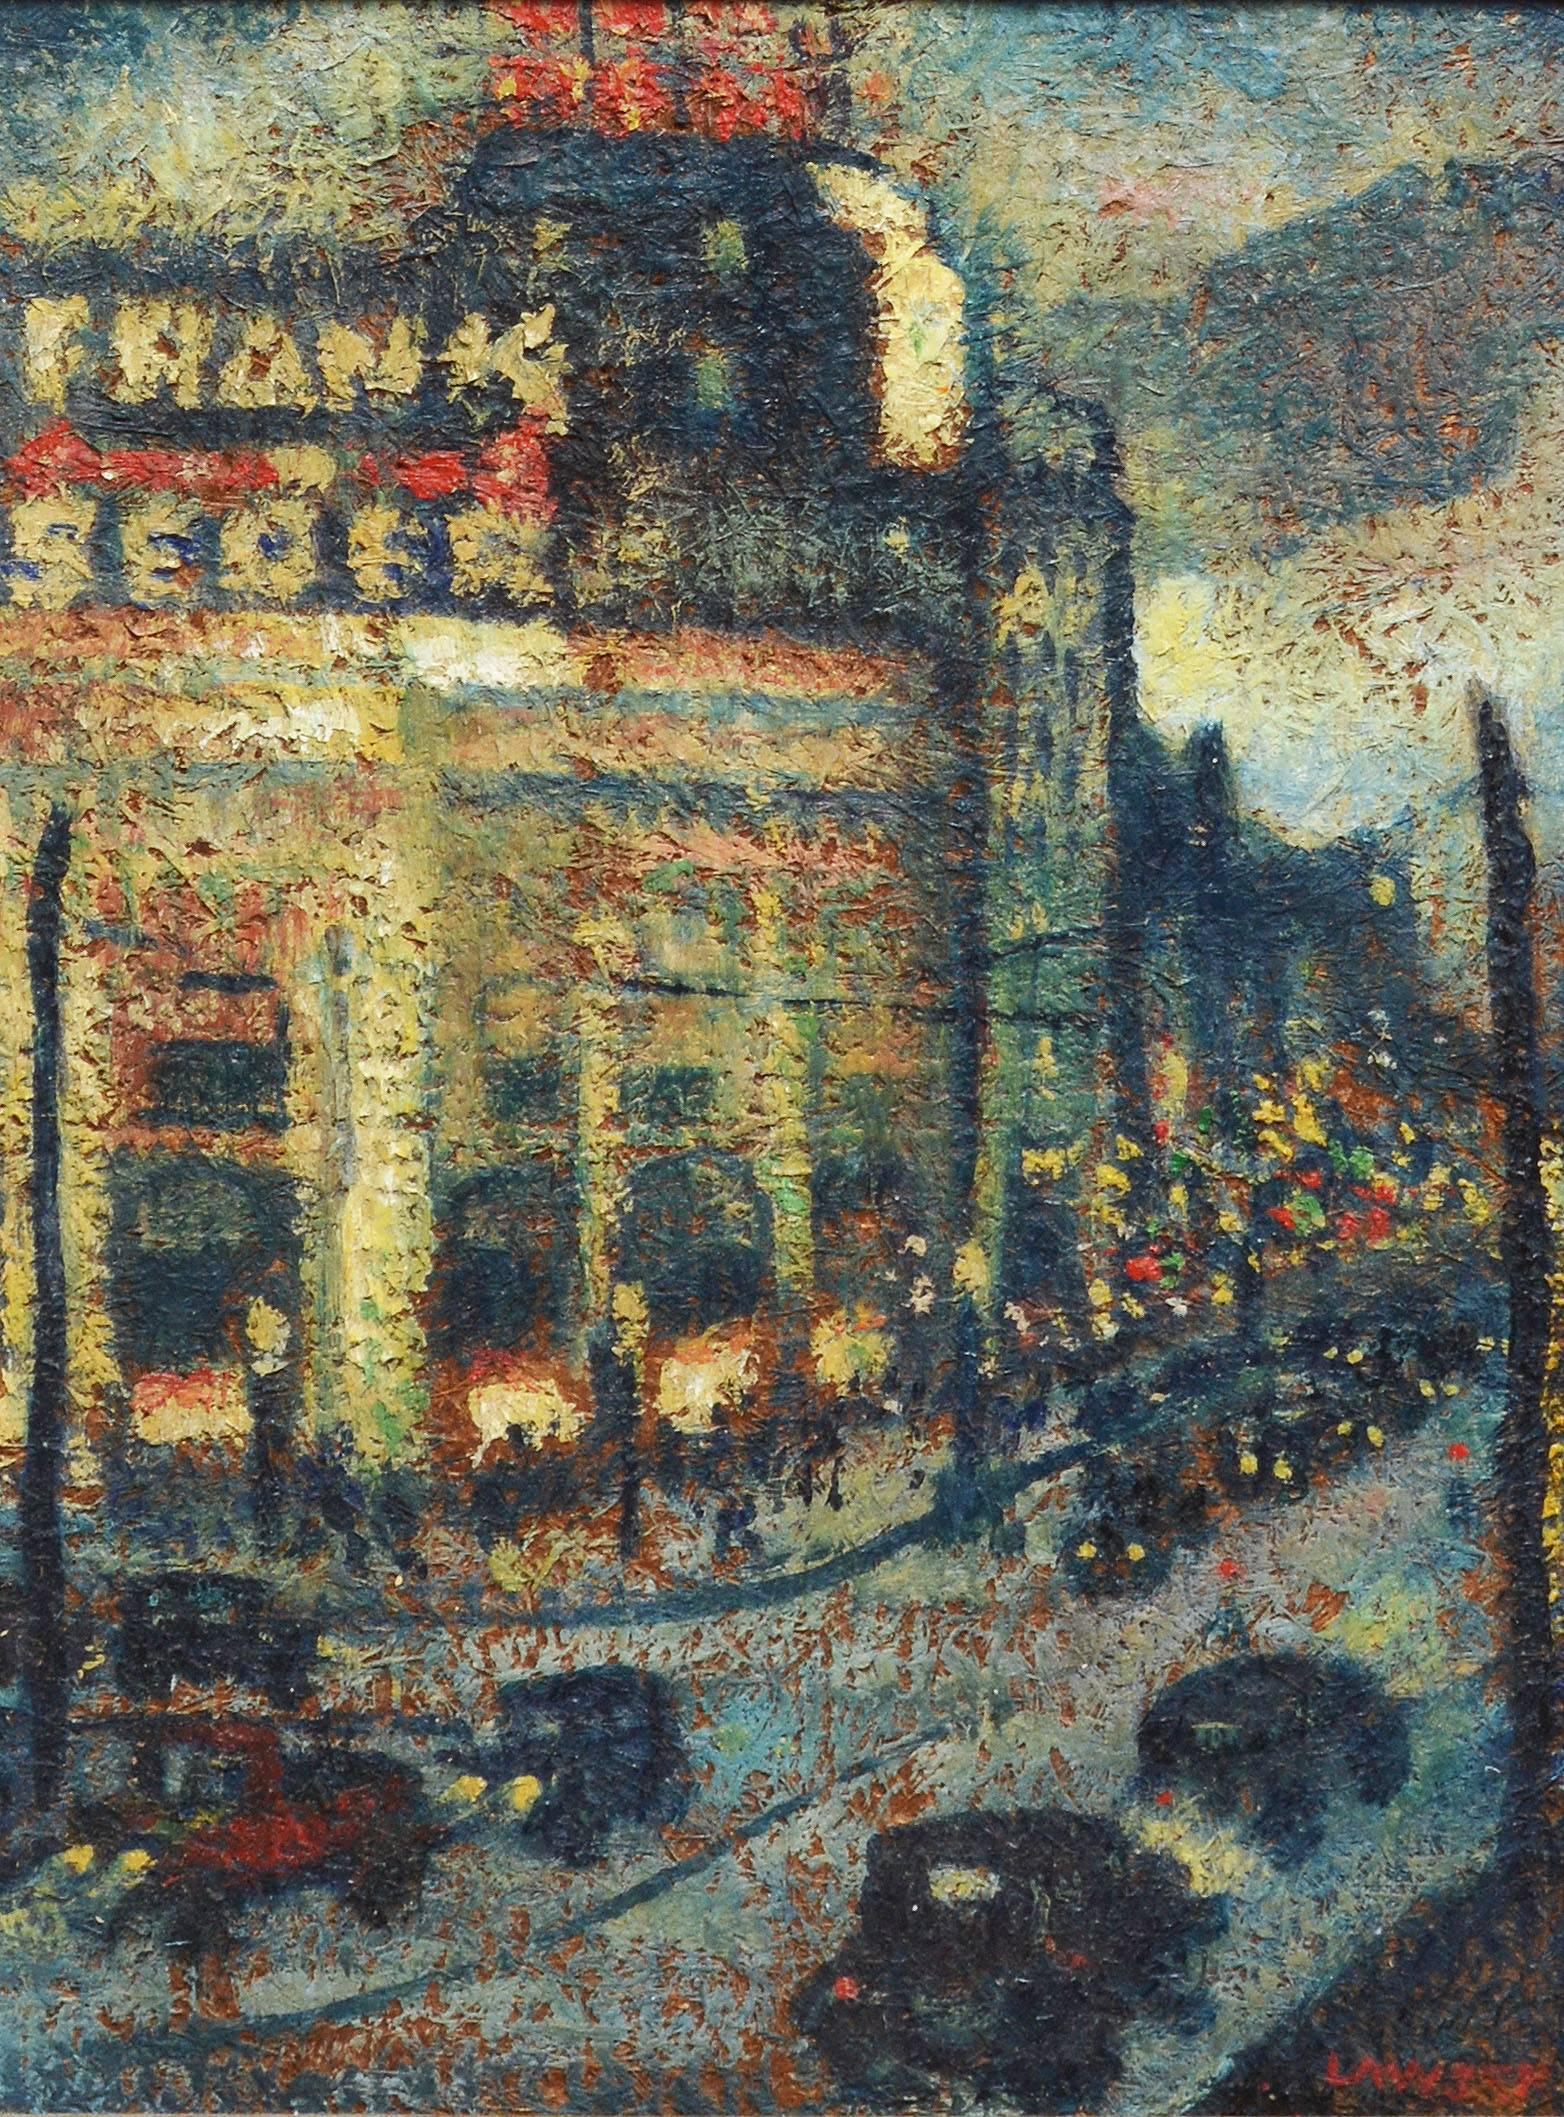 Ashcan School Cityscape View of a Busy New York Street at Night - Impressionist Painting by Unknown